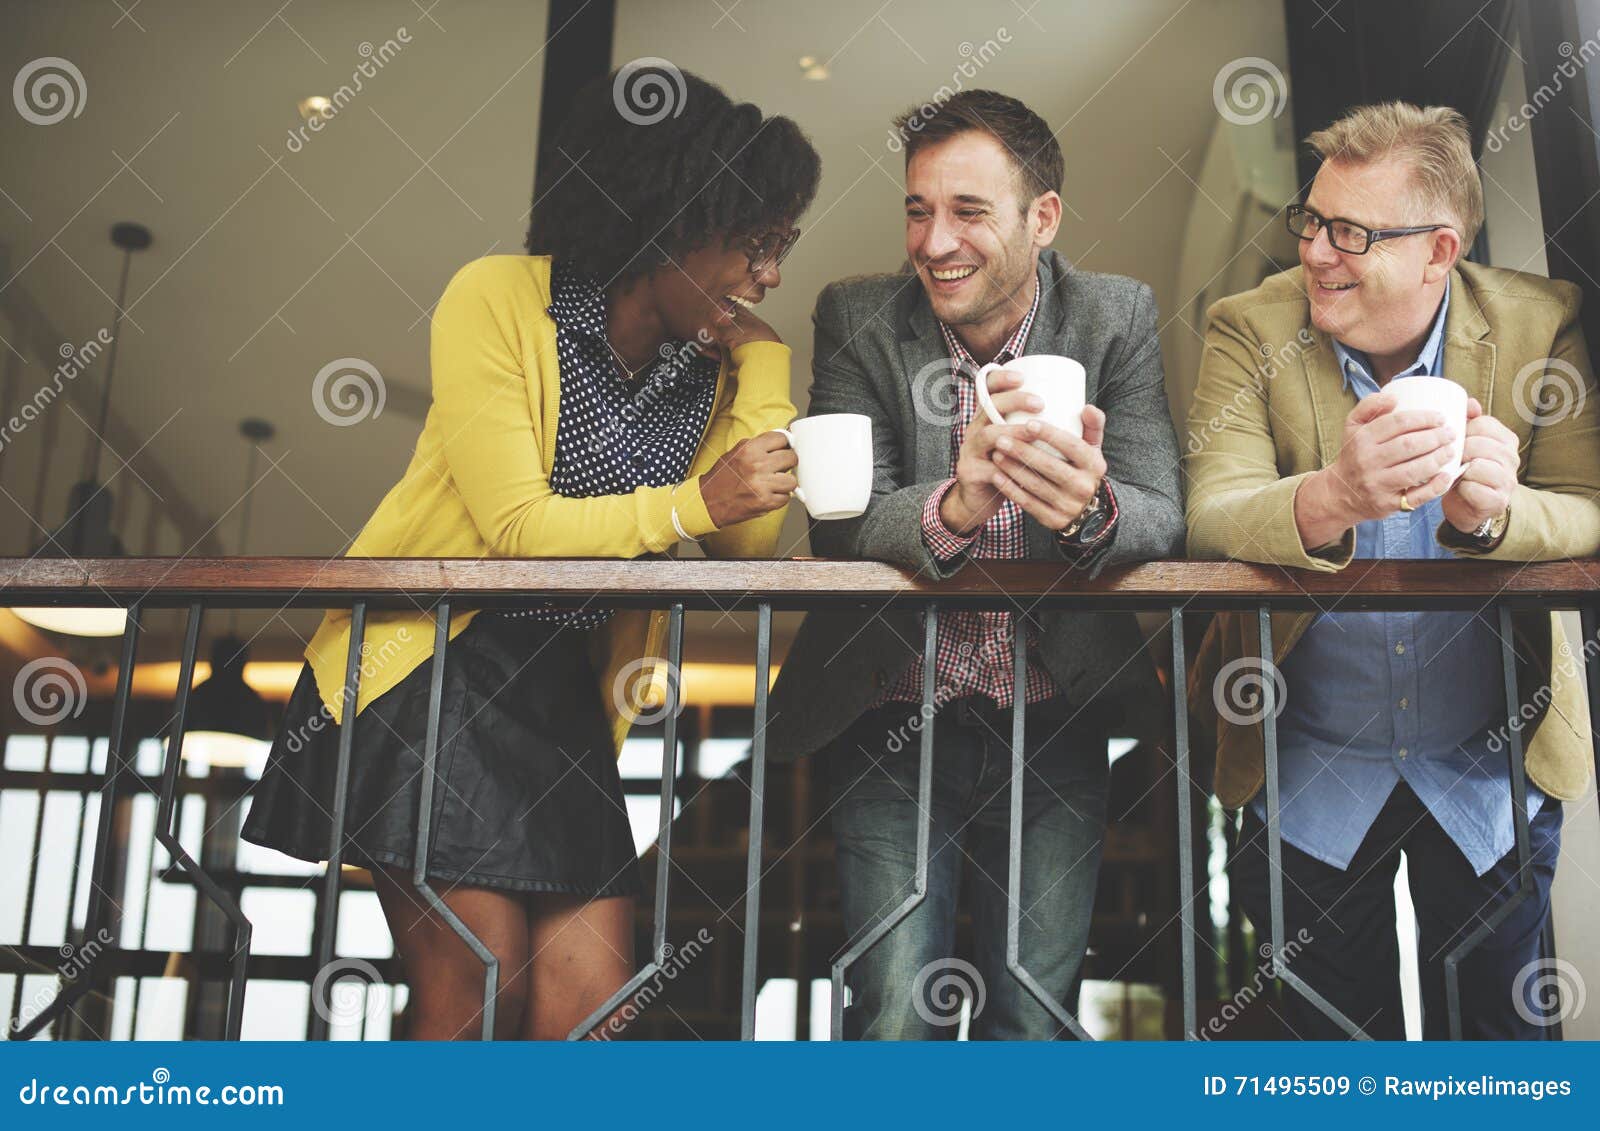 group business people chatting balcony concept